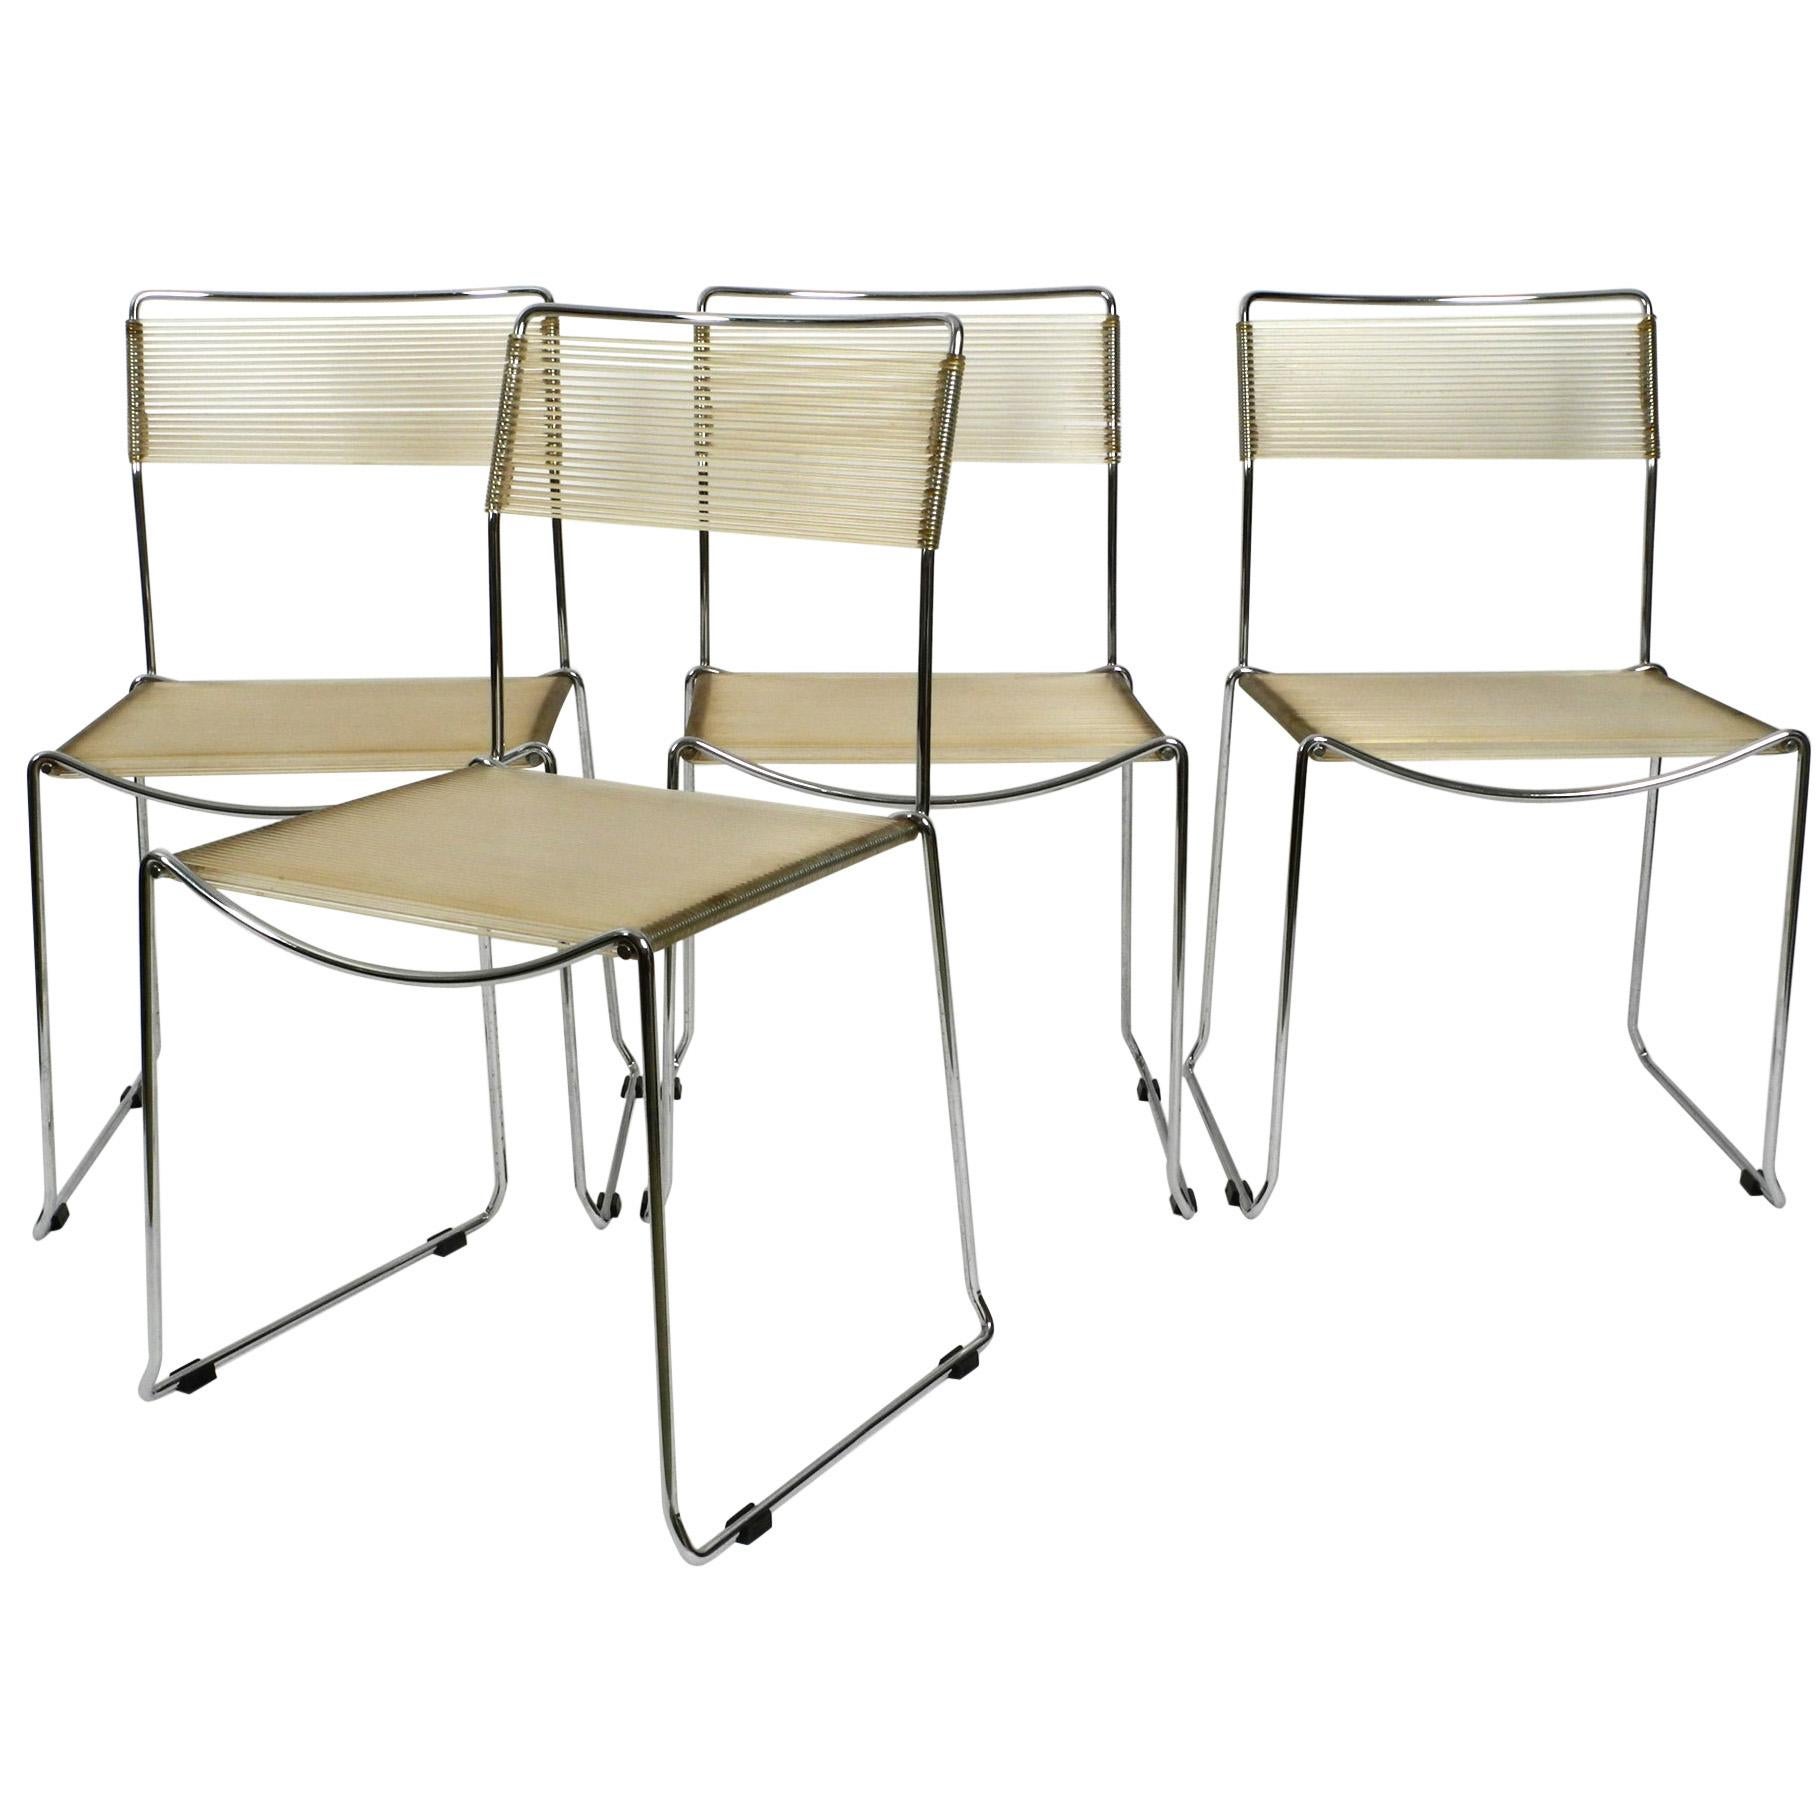 Four Original Very Well Preserved 1970s Spaghetti Chairs with Chromed  Frames For Sale at 1stDibs